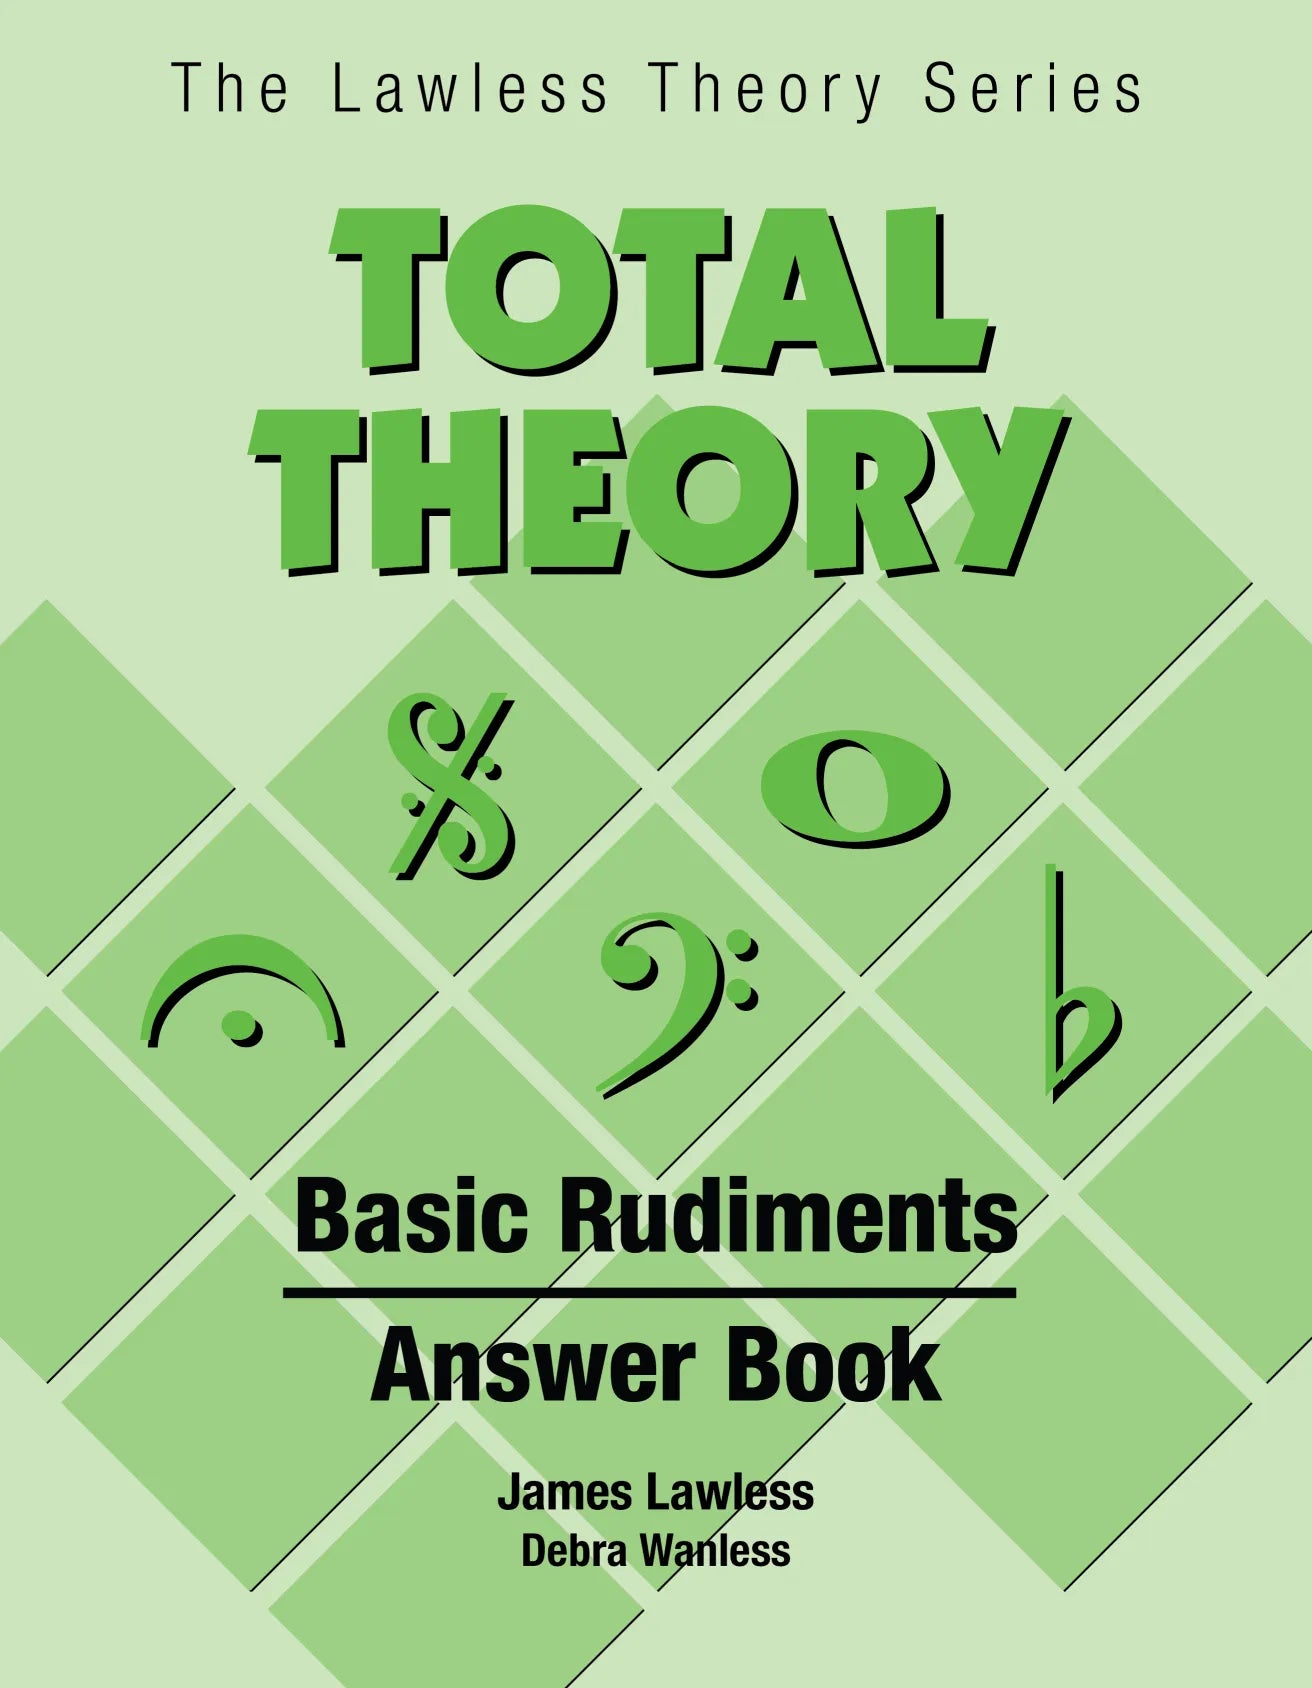 Total Theory Basic Rudiments Answer Book by James Lawless